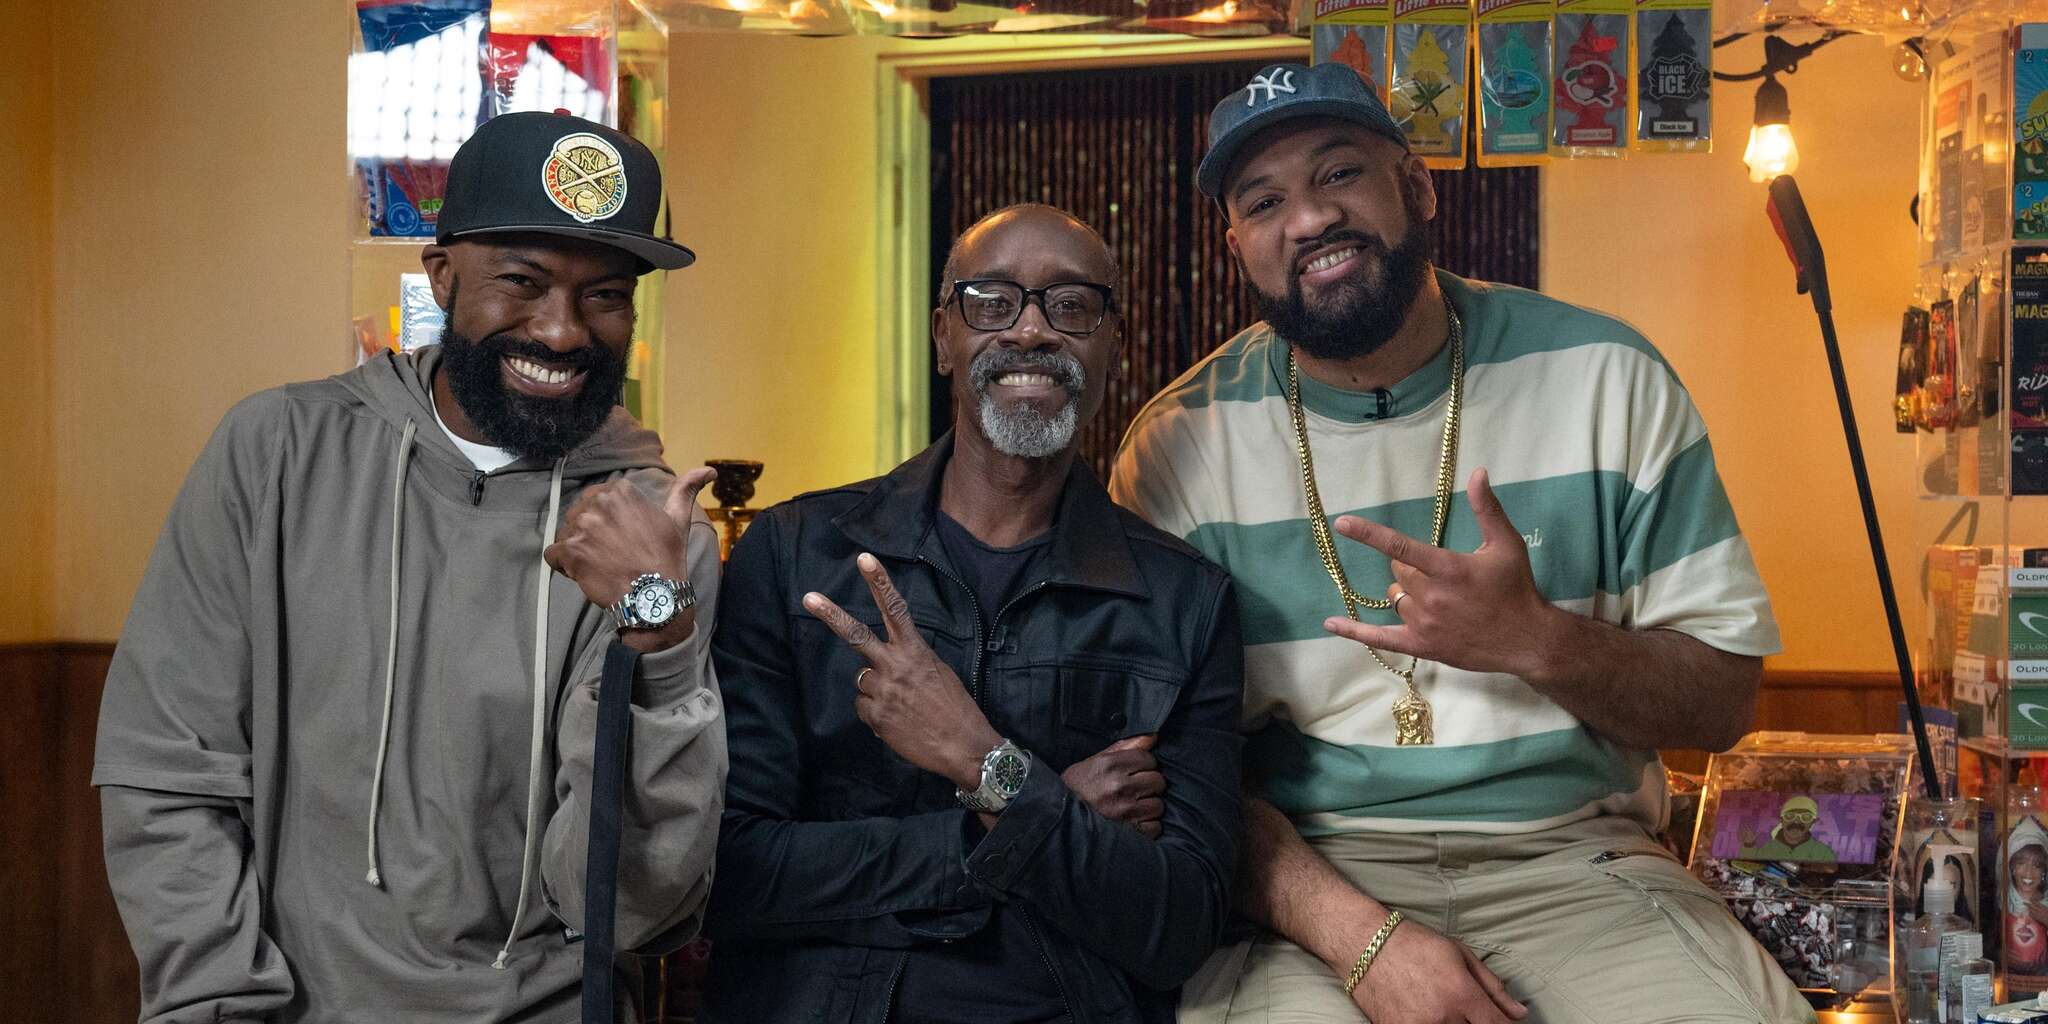 Don Cheadle, The Kid Mero, and Desus Nice in Mid-Nup (2021)